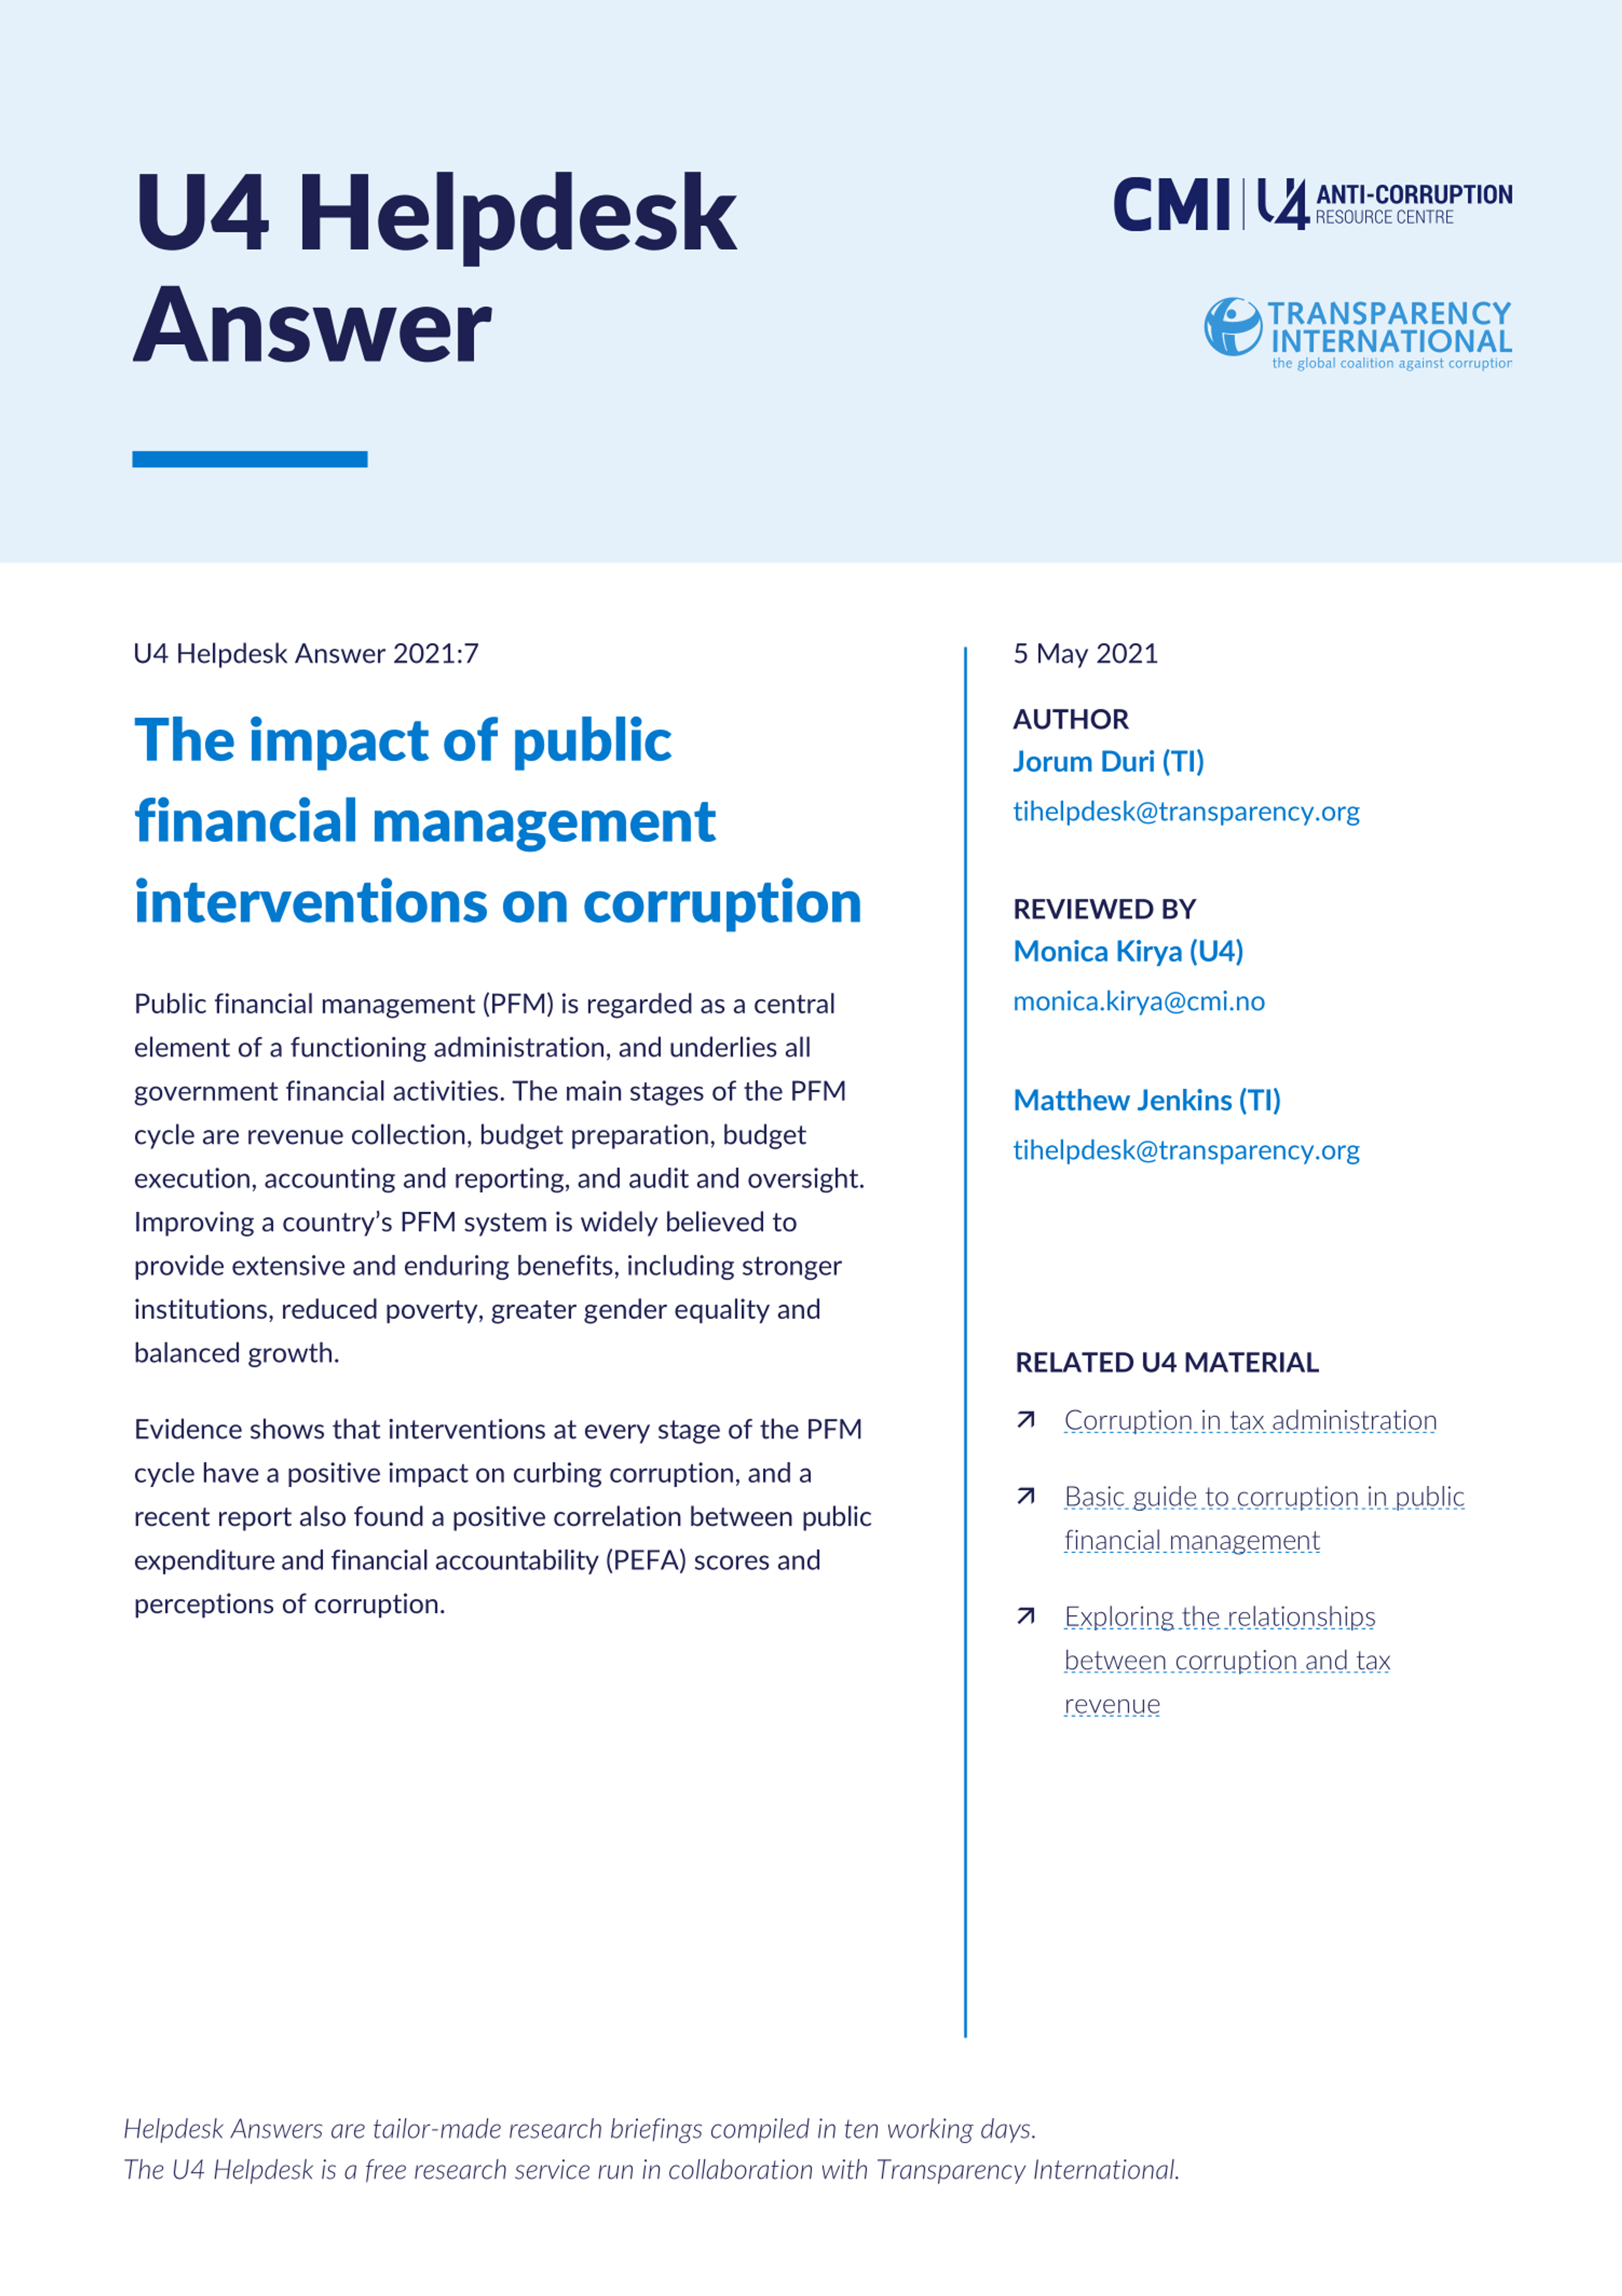 The impact of public financial management interventions on corruption